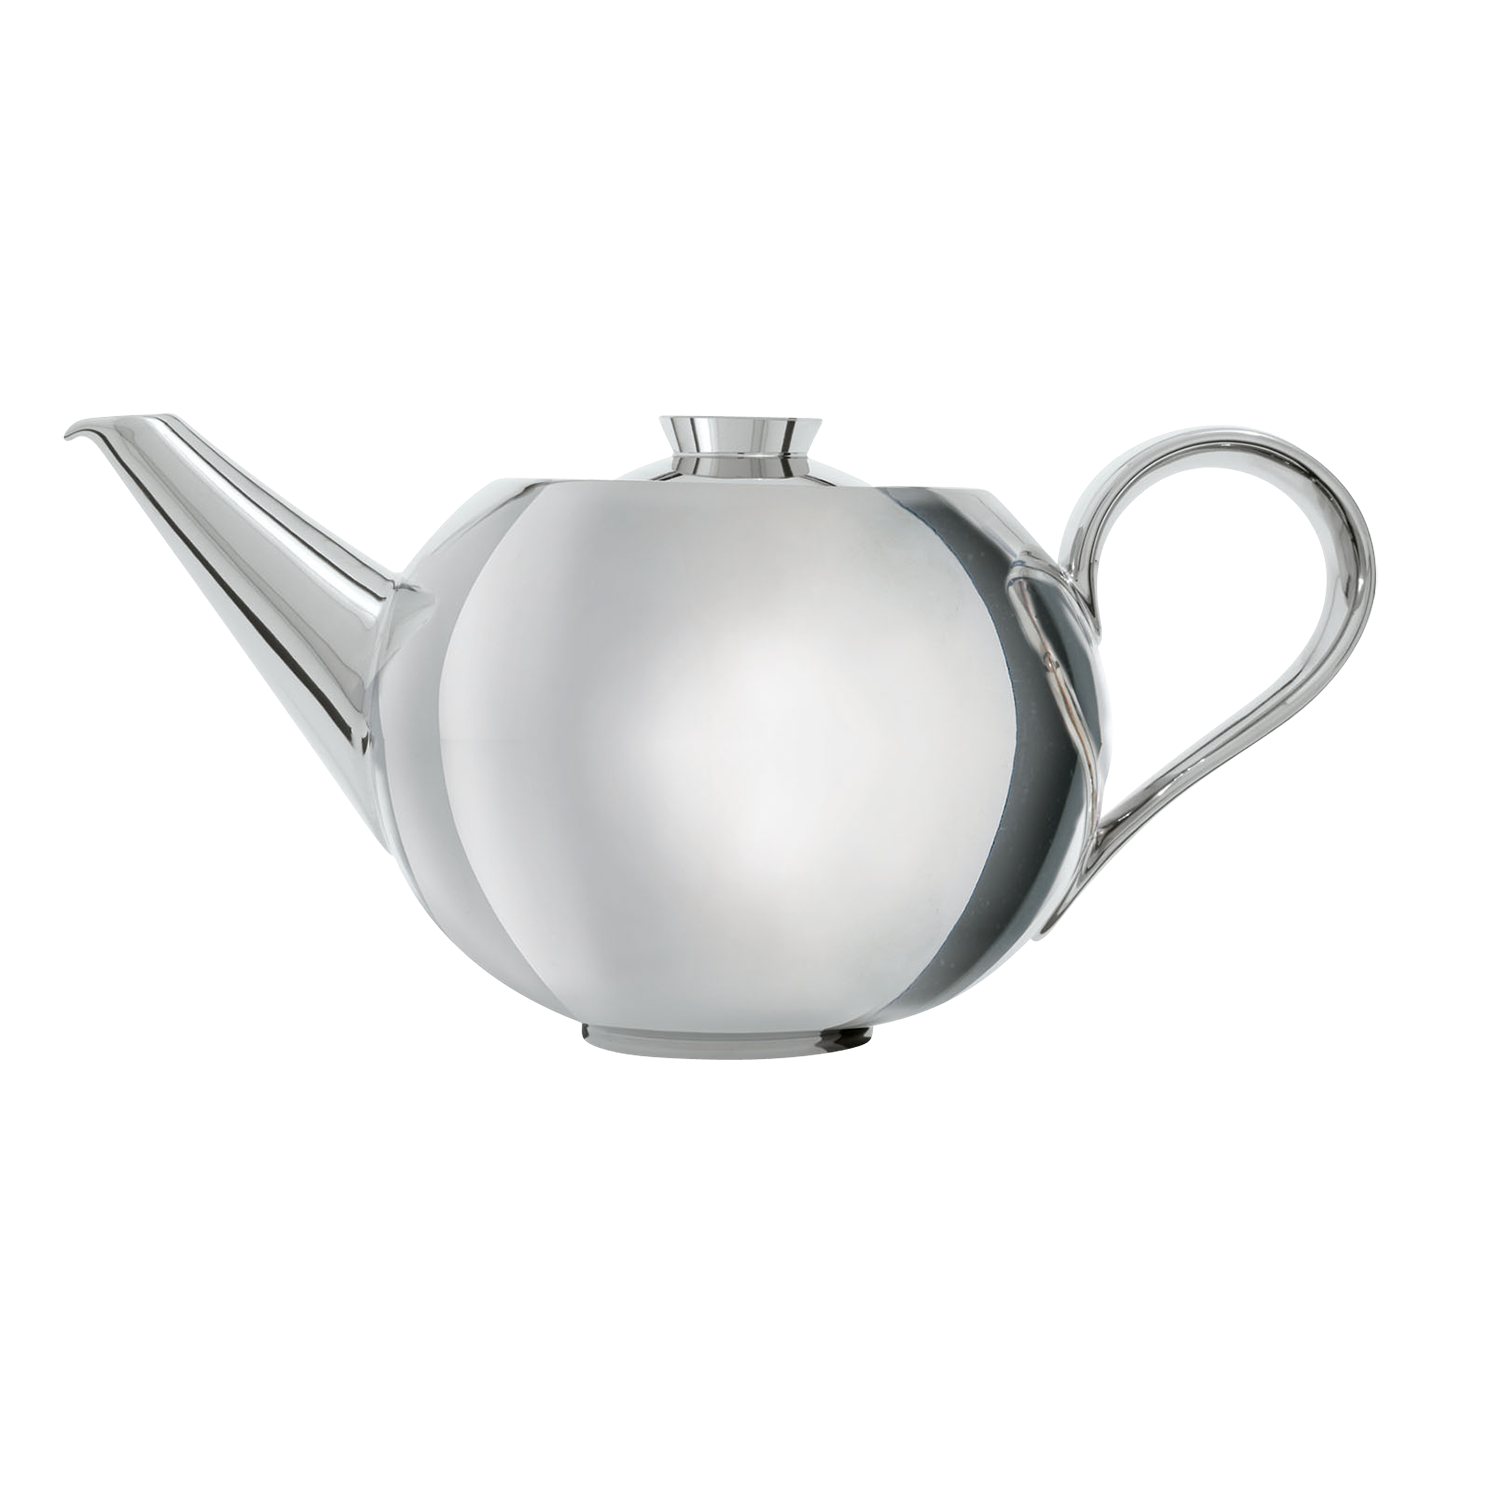 Teapot with Tea Strainer Sieger by Furstenberg Collection My China! Treasure Platinum 1.45 L